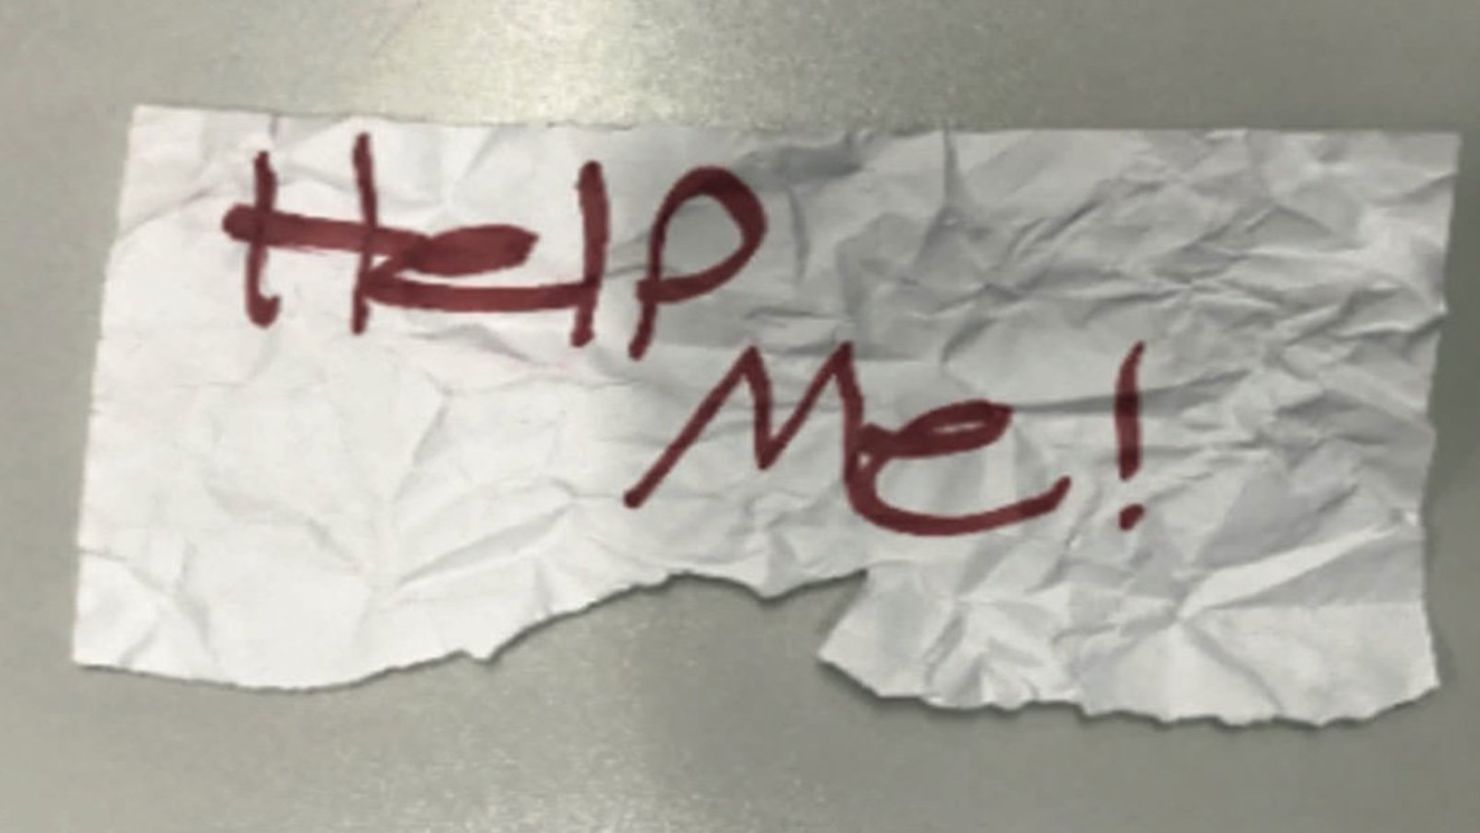 Kidnapping victim's "Help Me!" sign